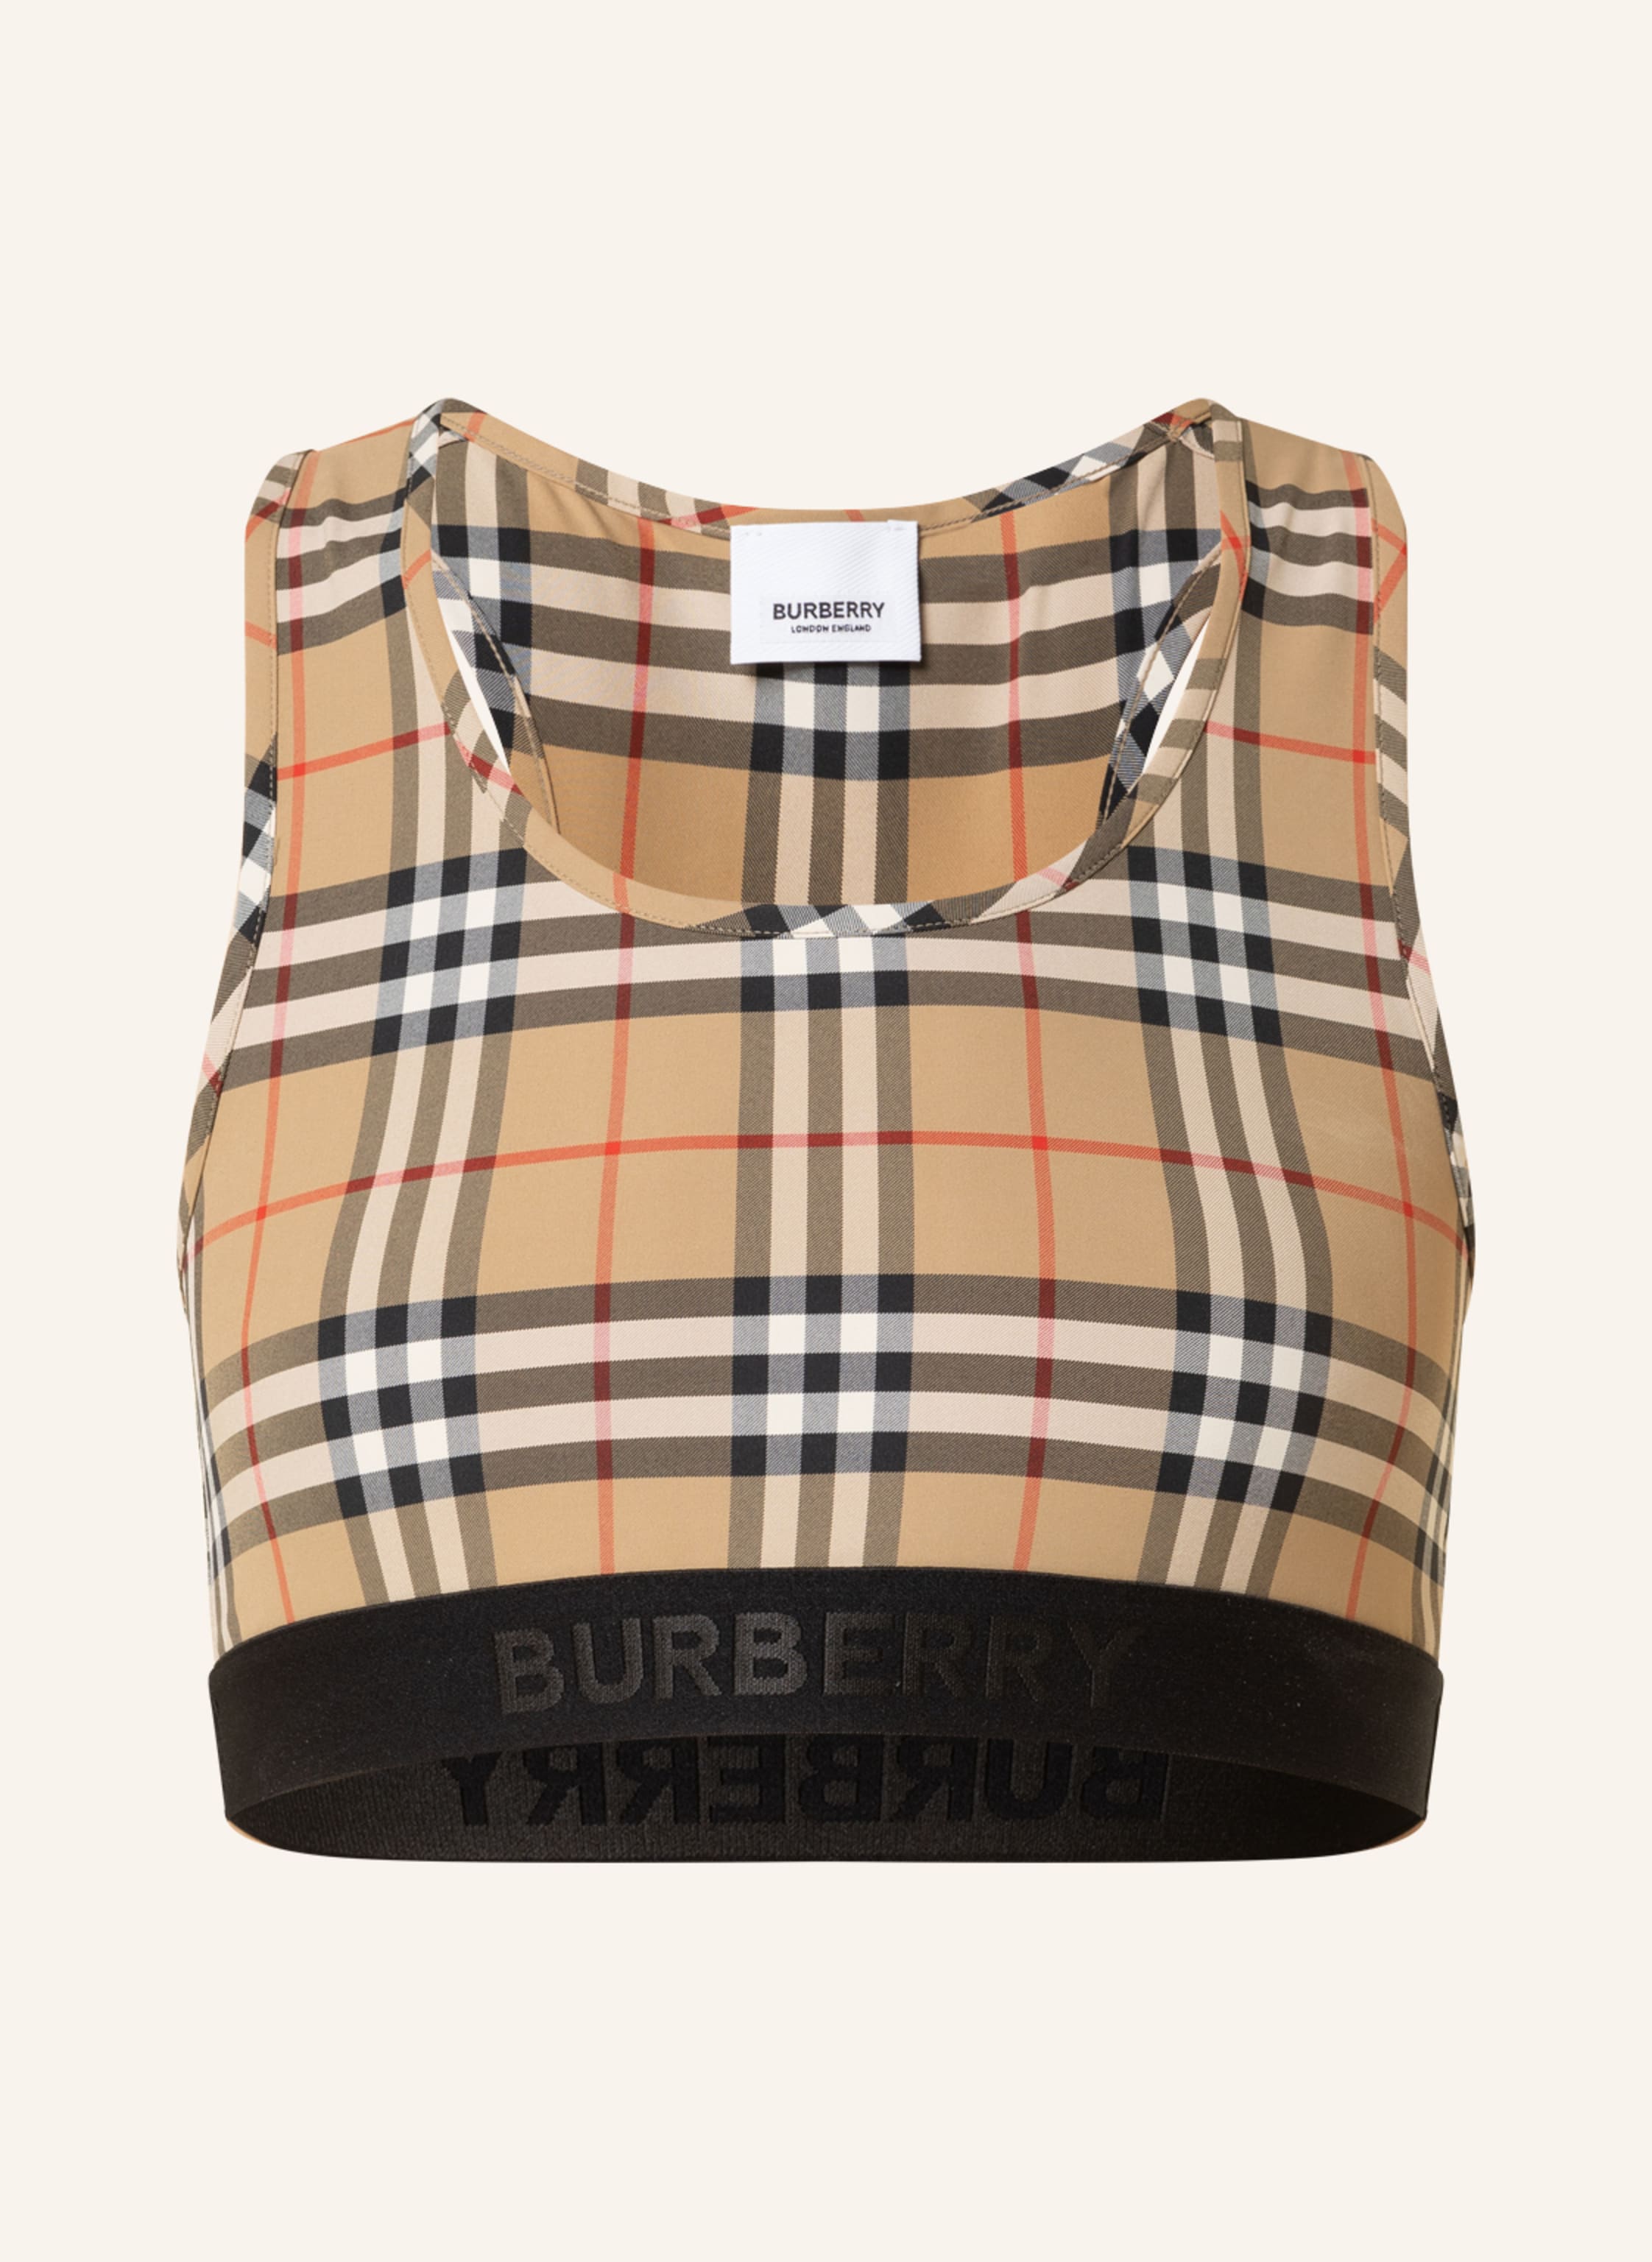 BURBERRY Cropped top DALBY in beige/ brown/ red | Breuninger